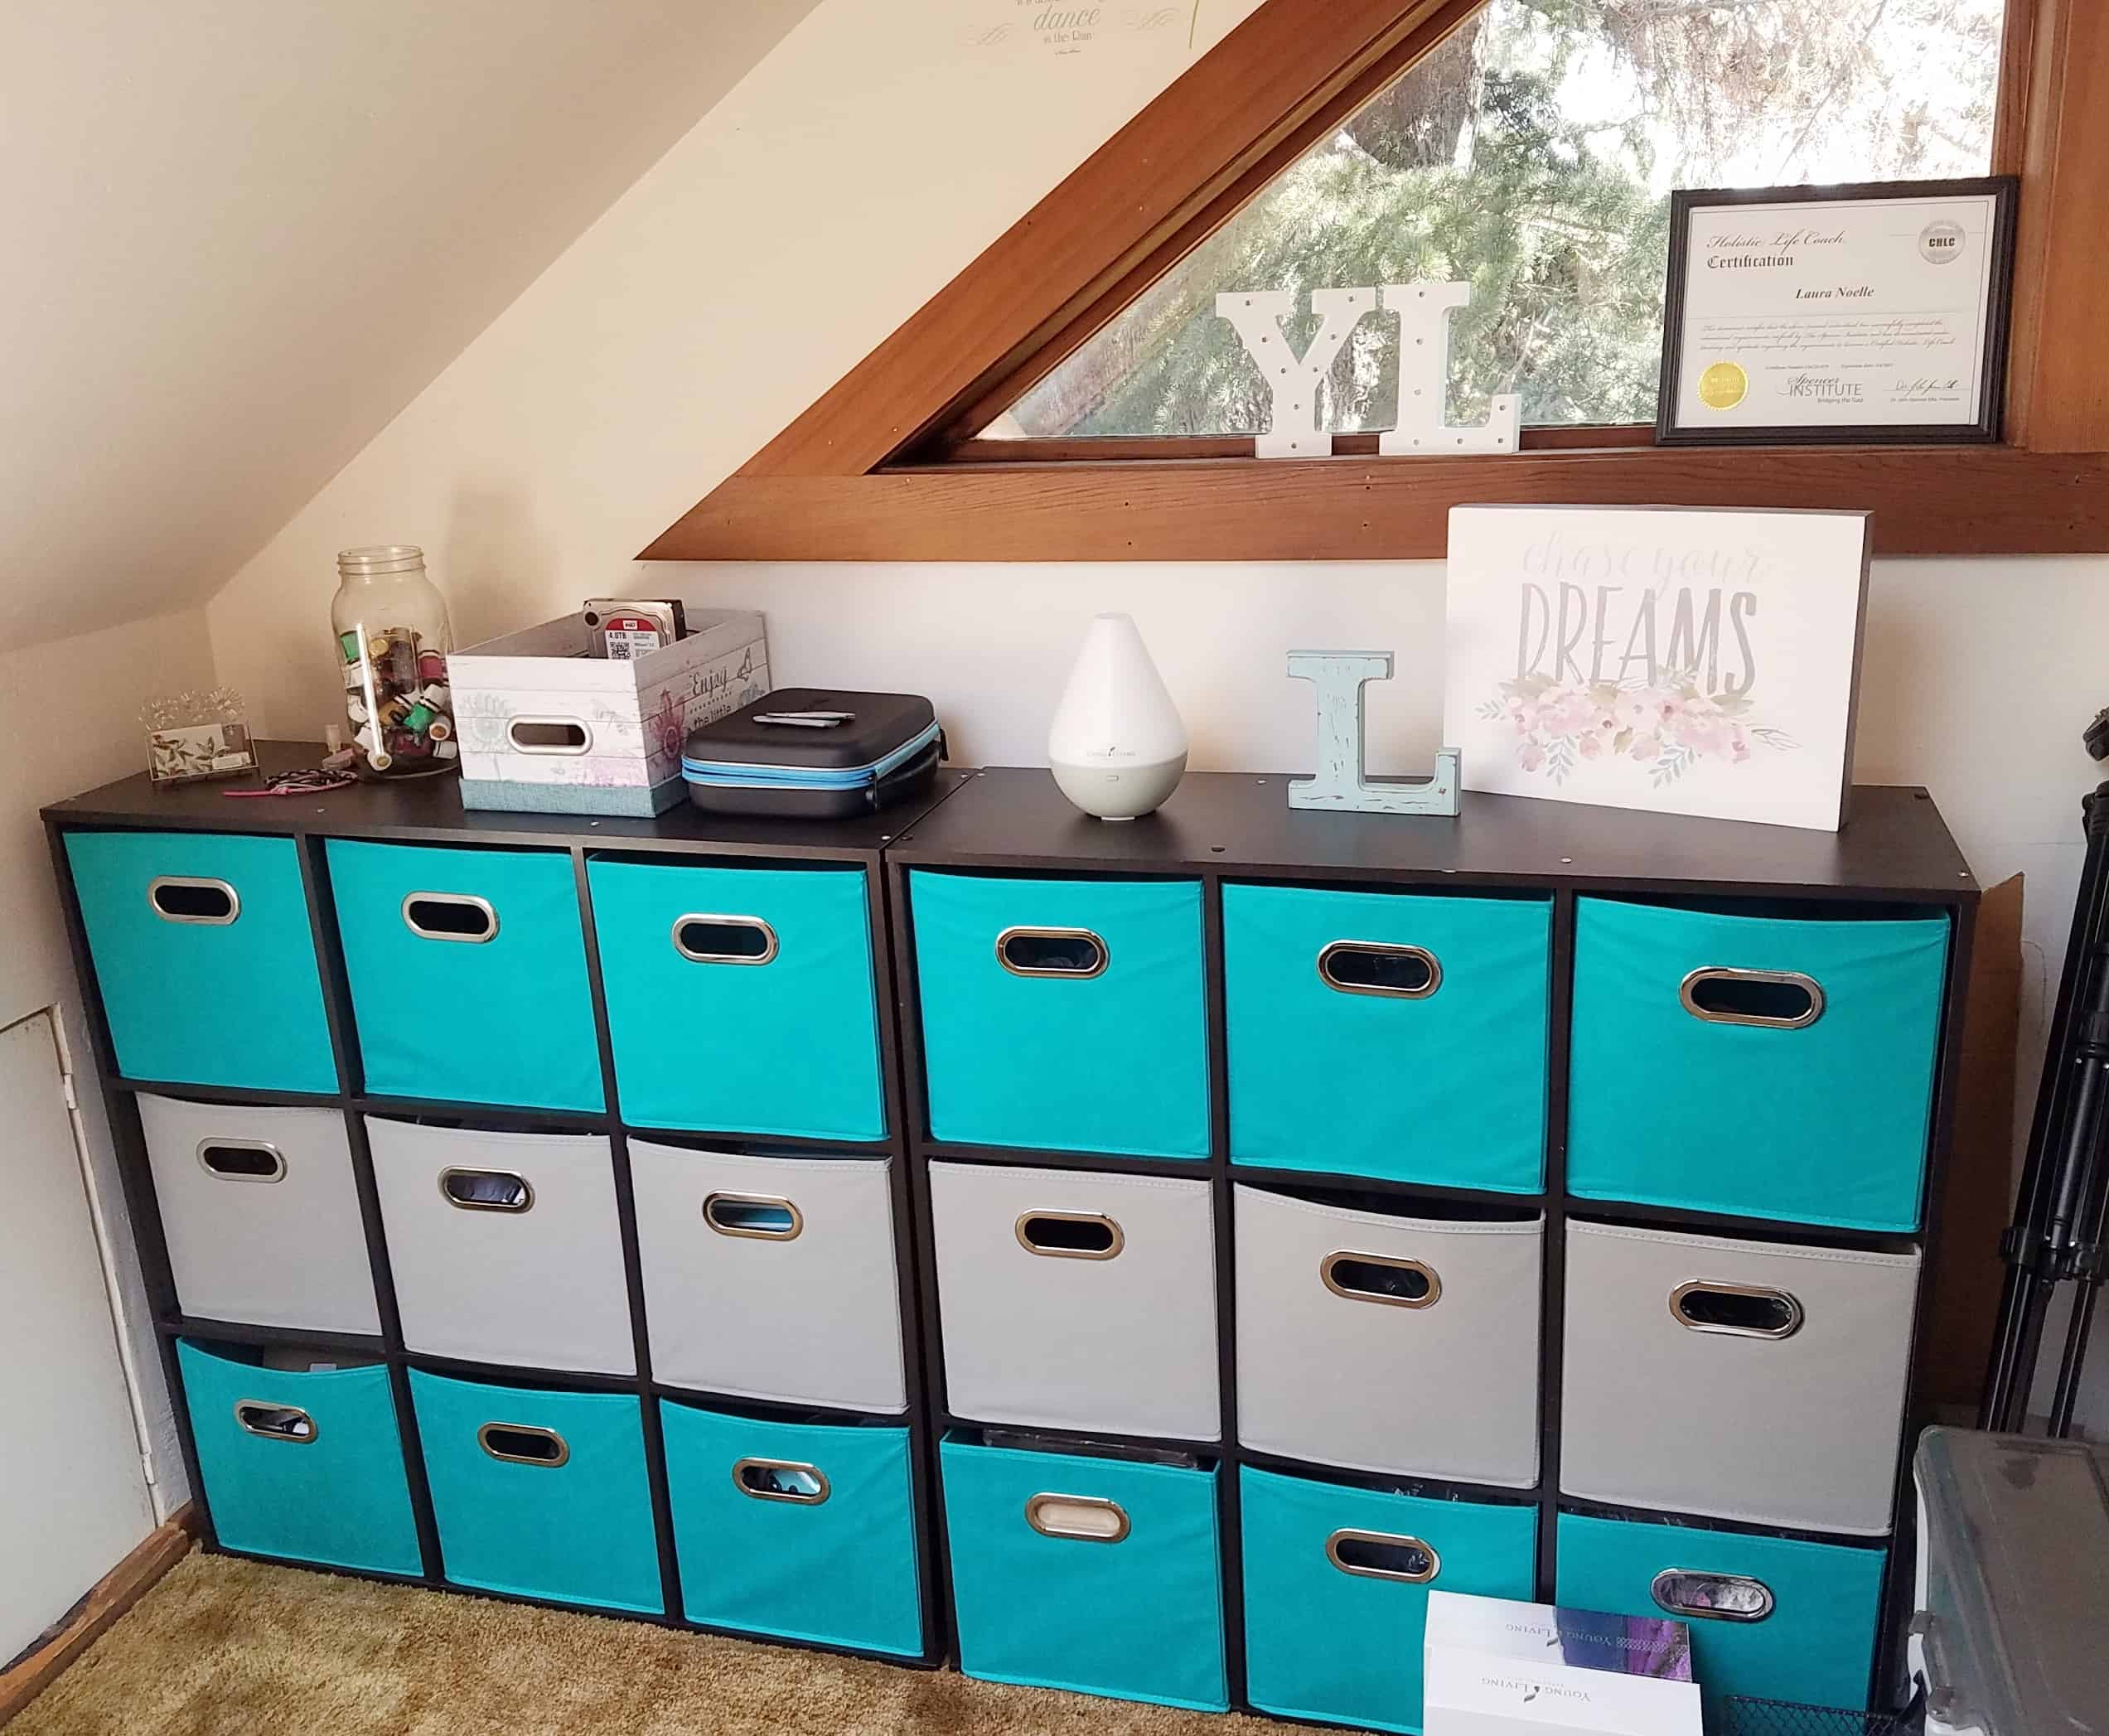 A simple home office can be inspiring and effective--here are some organization ideas!